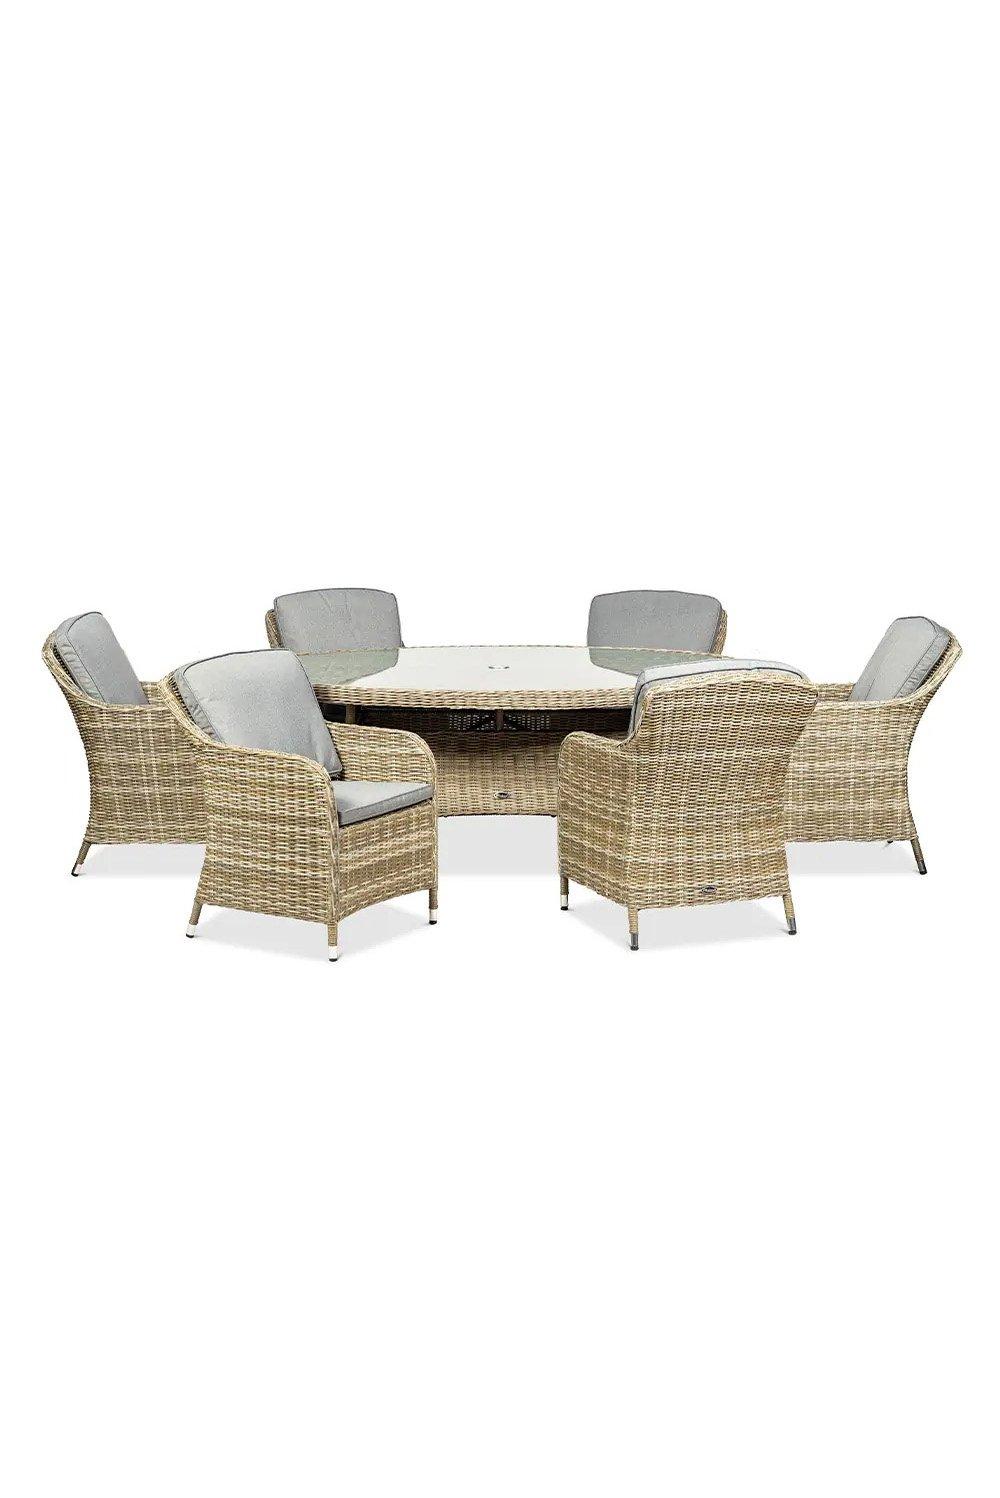 WENTWORTH 6 Seater Ellipse Imperial Dining Set